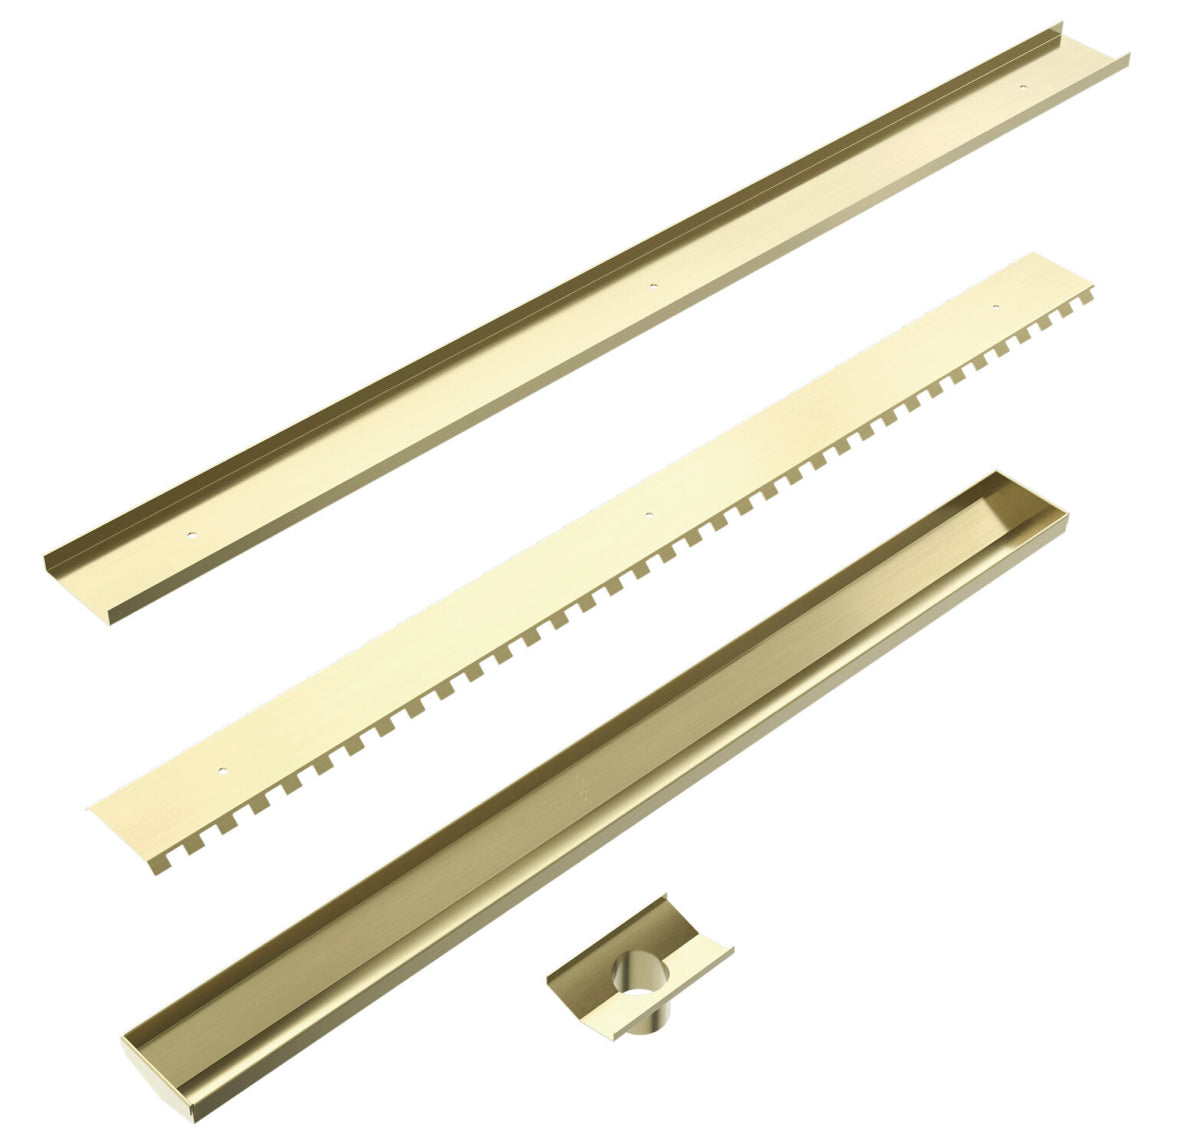 Owen & Finch Douchegoot Met Tegelrooster Brushed Champagne Gold PVD 900mm